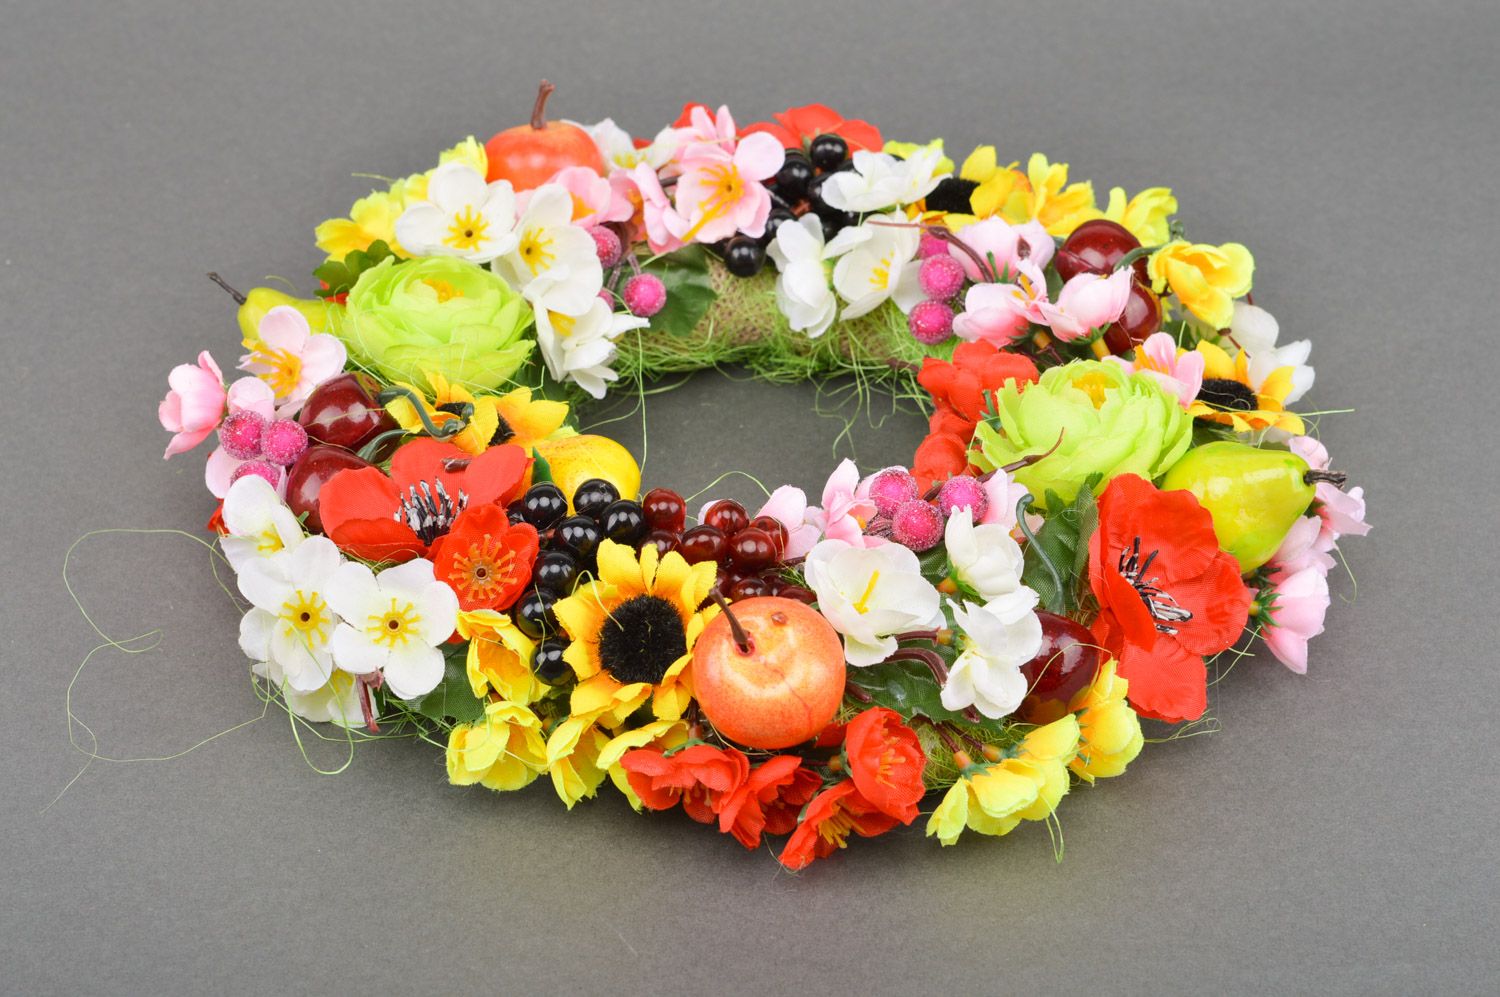 Handmade large bright door wreath with artificial flowers and fruits for home decor photo 2